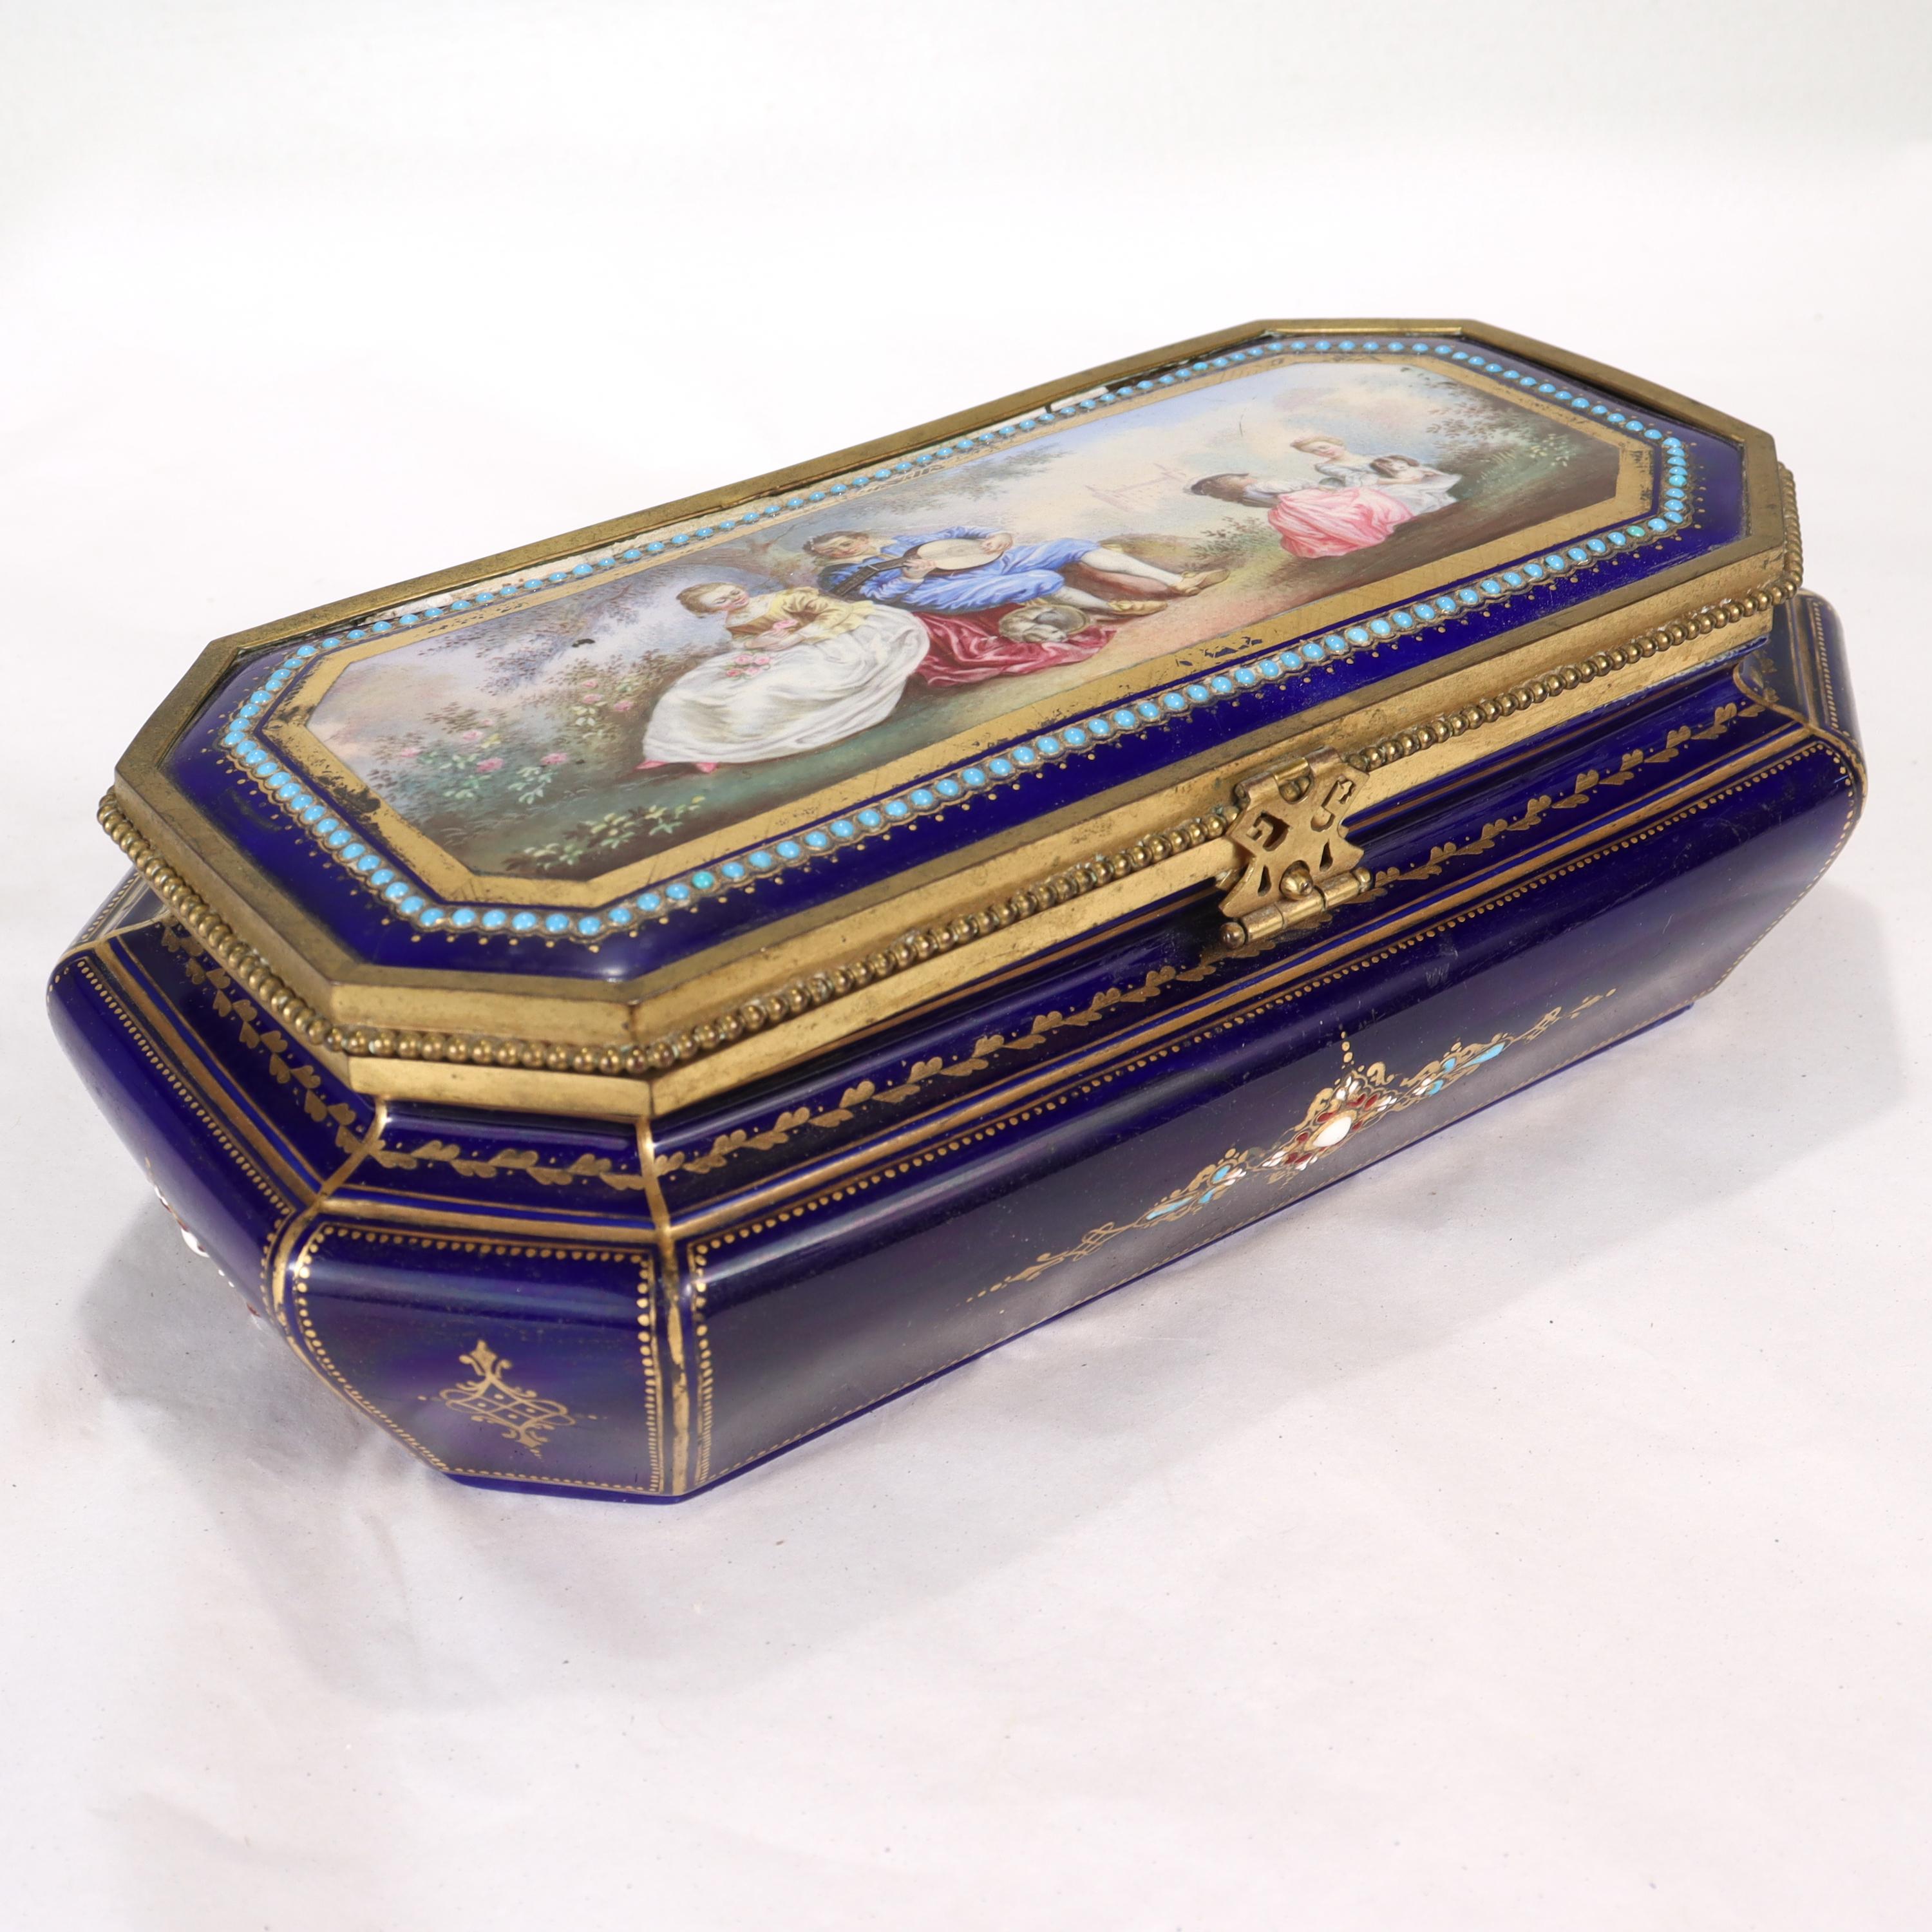 A very fine antique Sevres style French porcelain dresser box or casket.

With extensive gilt highlights and turquoise, red & white enamel jeweling throughout.

Decorated to the lid with a finely hand painted scene of a man playing the lute for